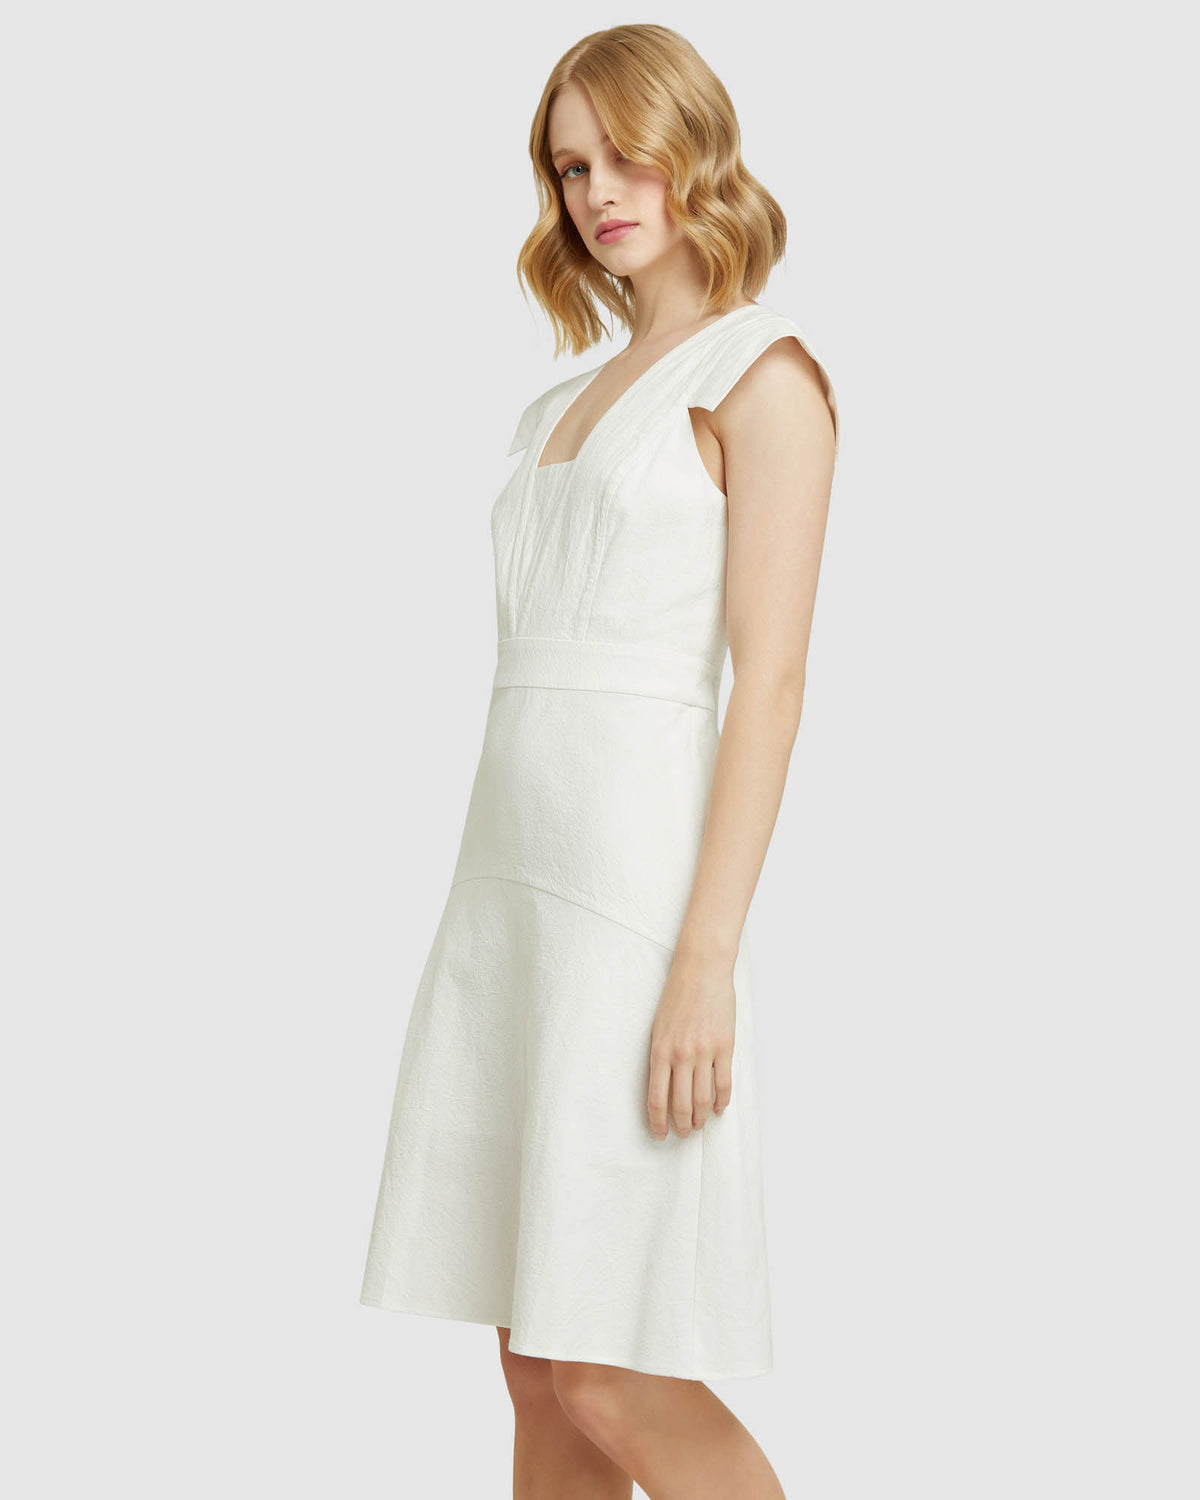 STANMORE COTTON DRESS IVORY